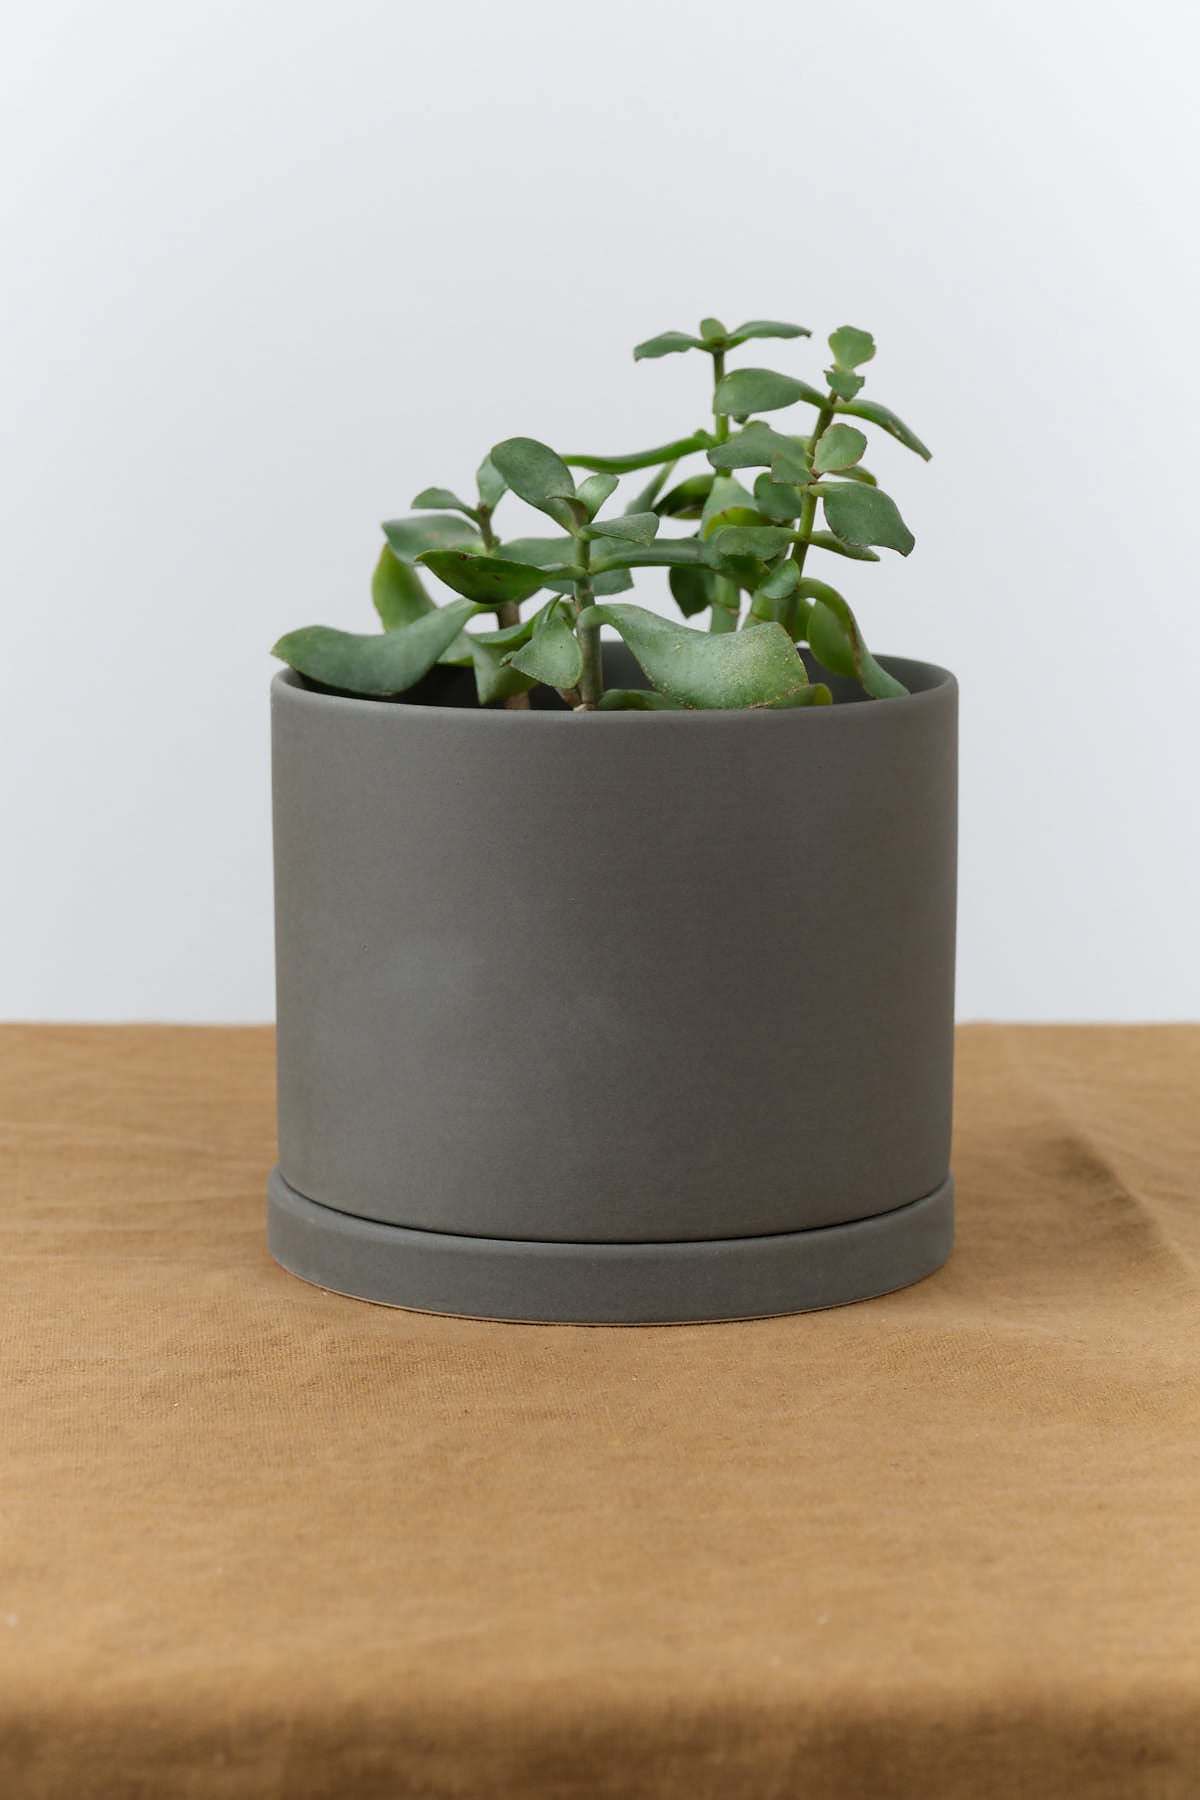 Front view of 5" Plant Pot with Drainage Holes in Dark Gray